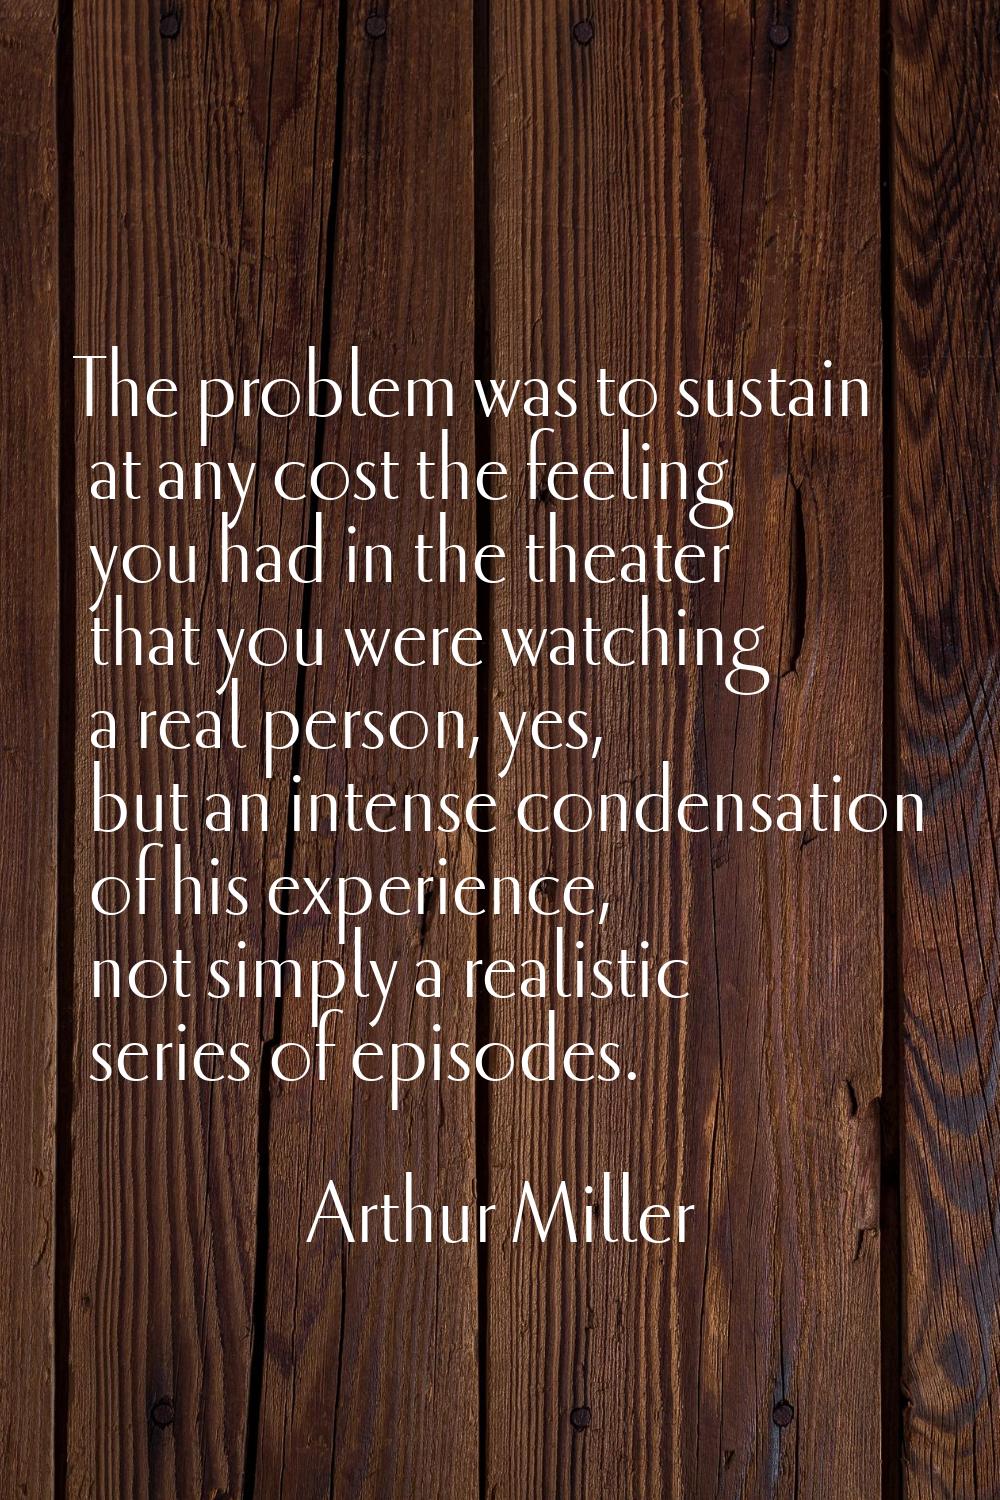 The problem was to sustain at any cost the feeling you had in the theater that you were watching a 